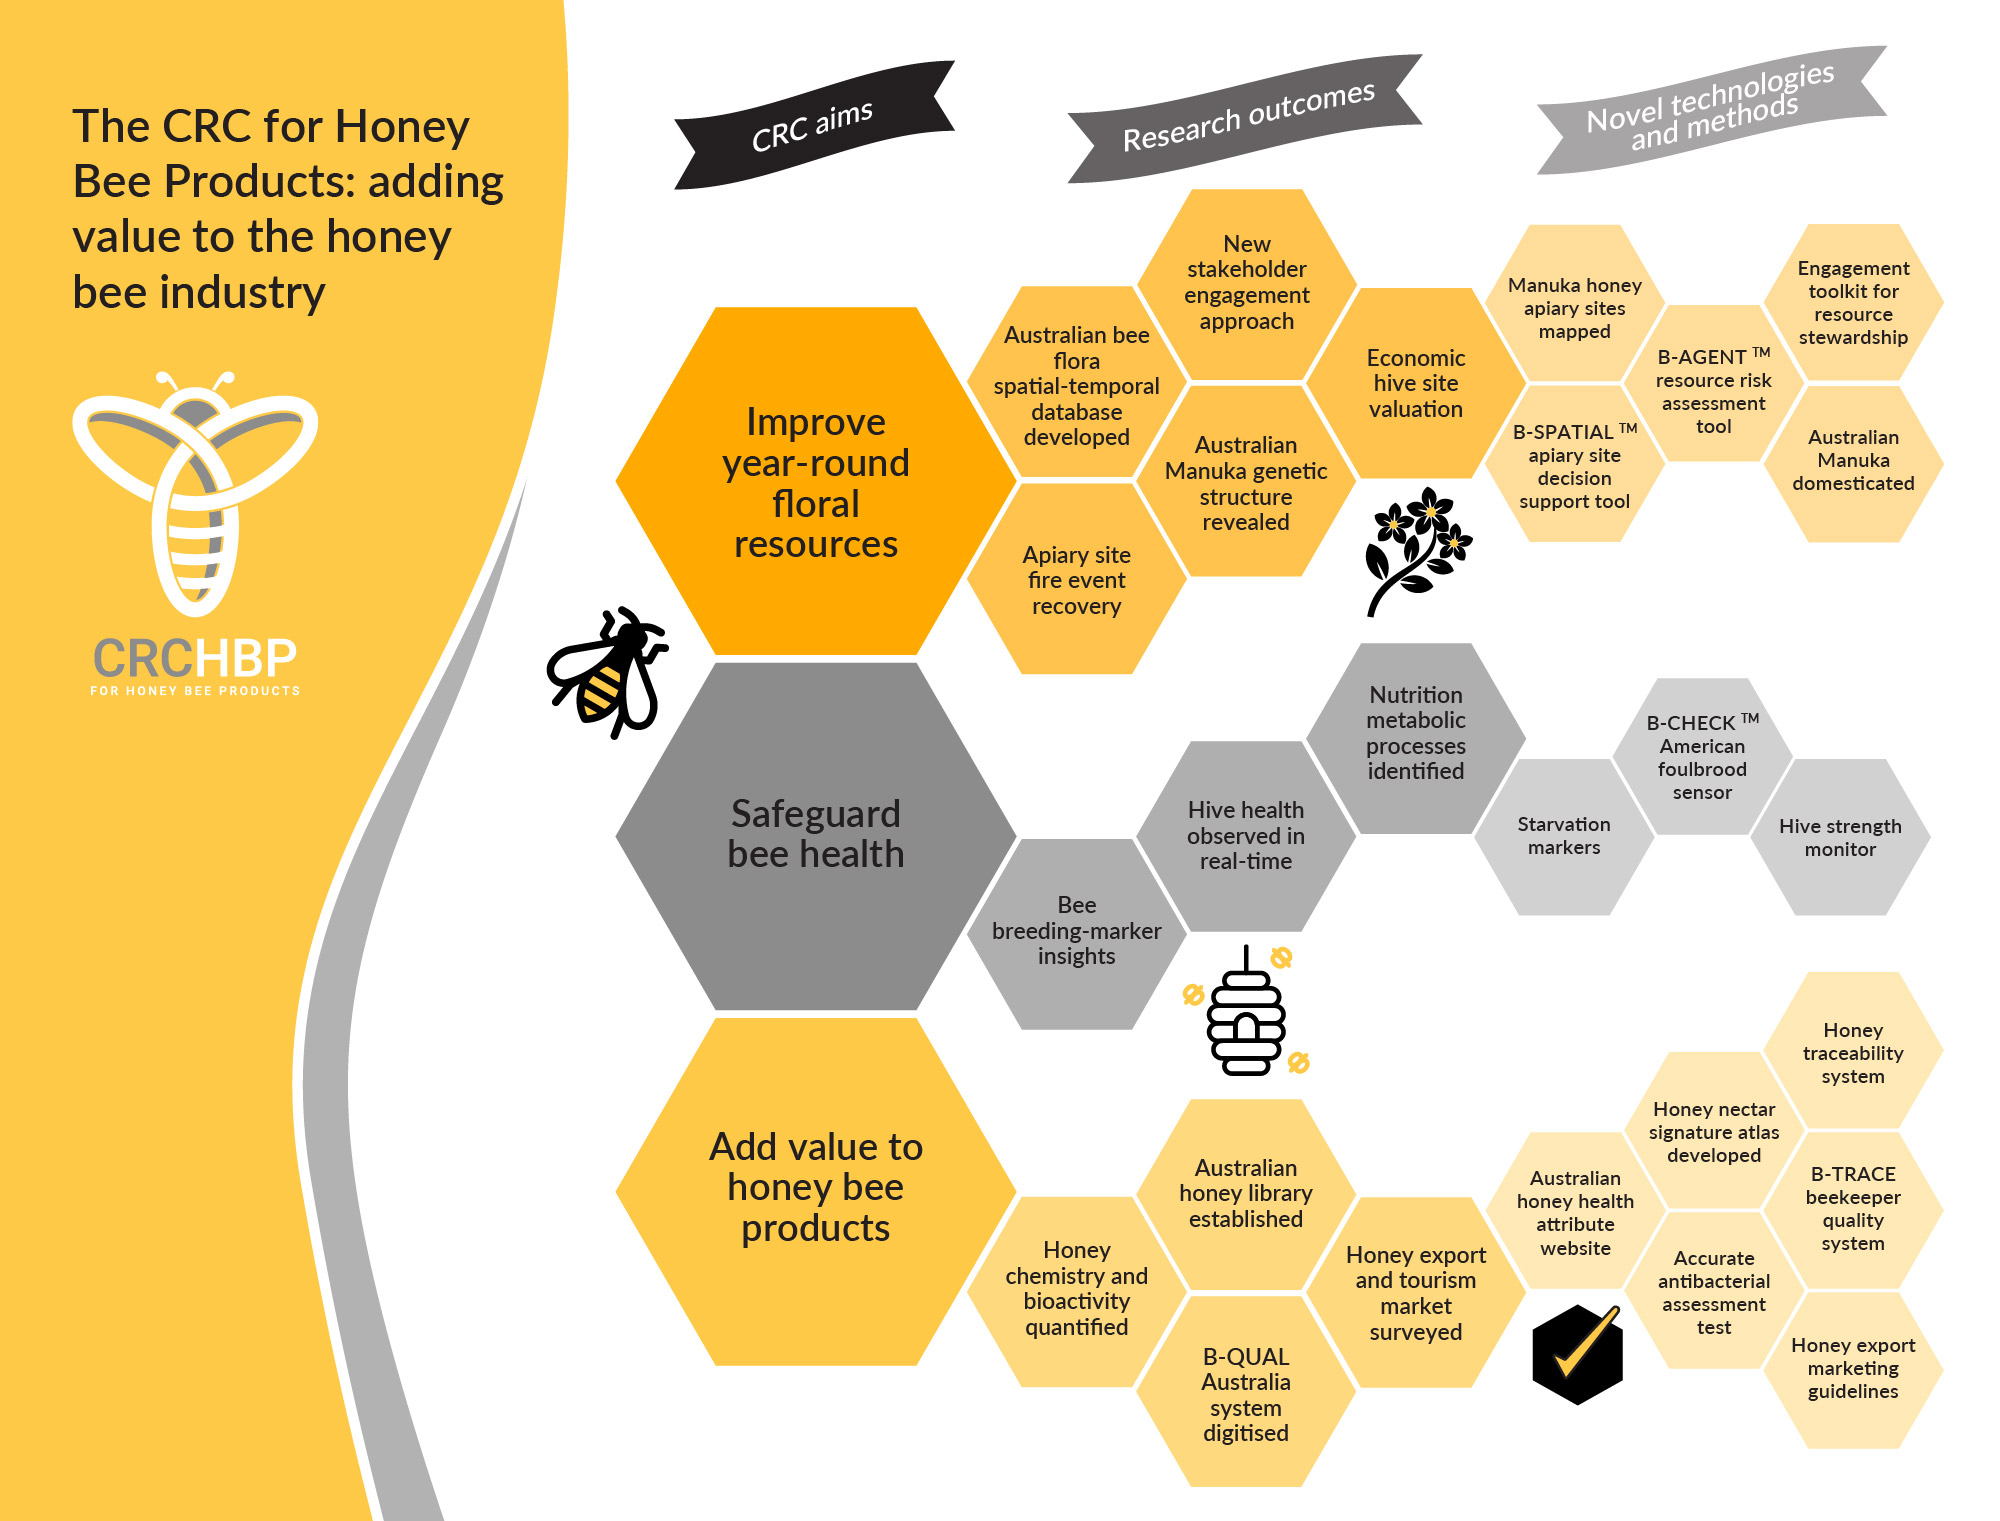 Cooperative Research Centre (CRC) for Honey Bee Products